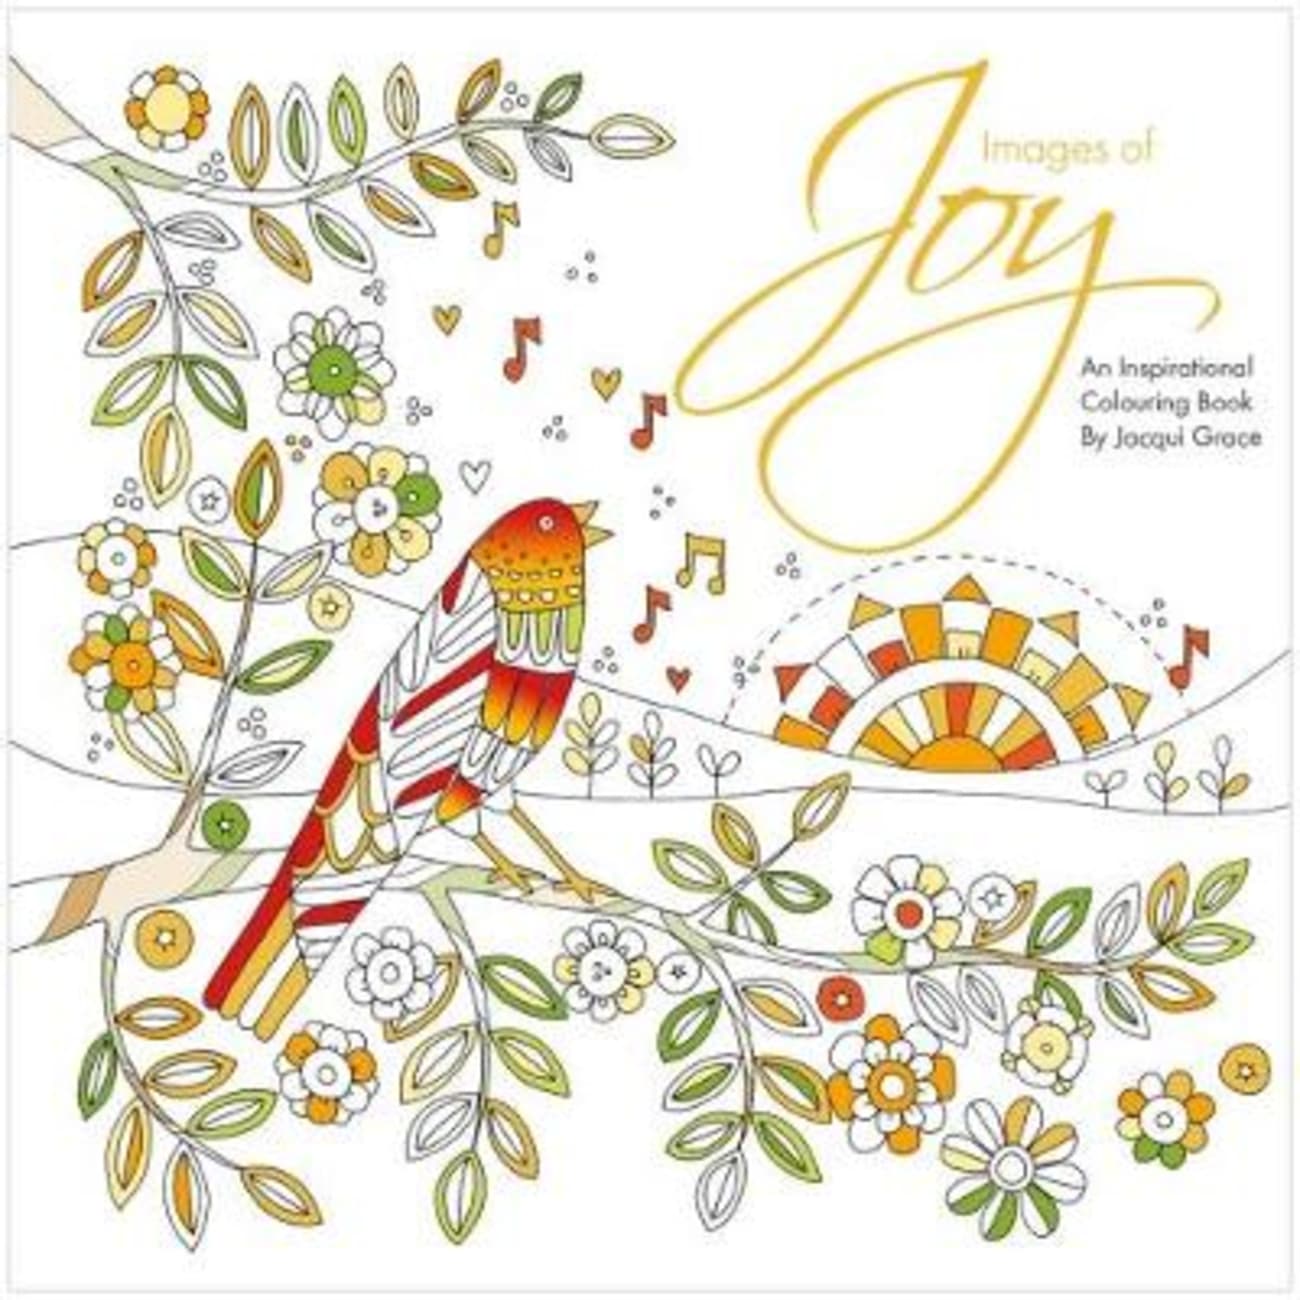 Images of Joy - An Inspirational Colouring Book (Adult Coloring Books Series) Paperback